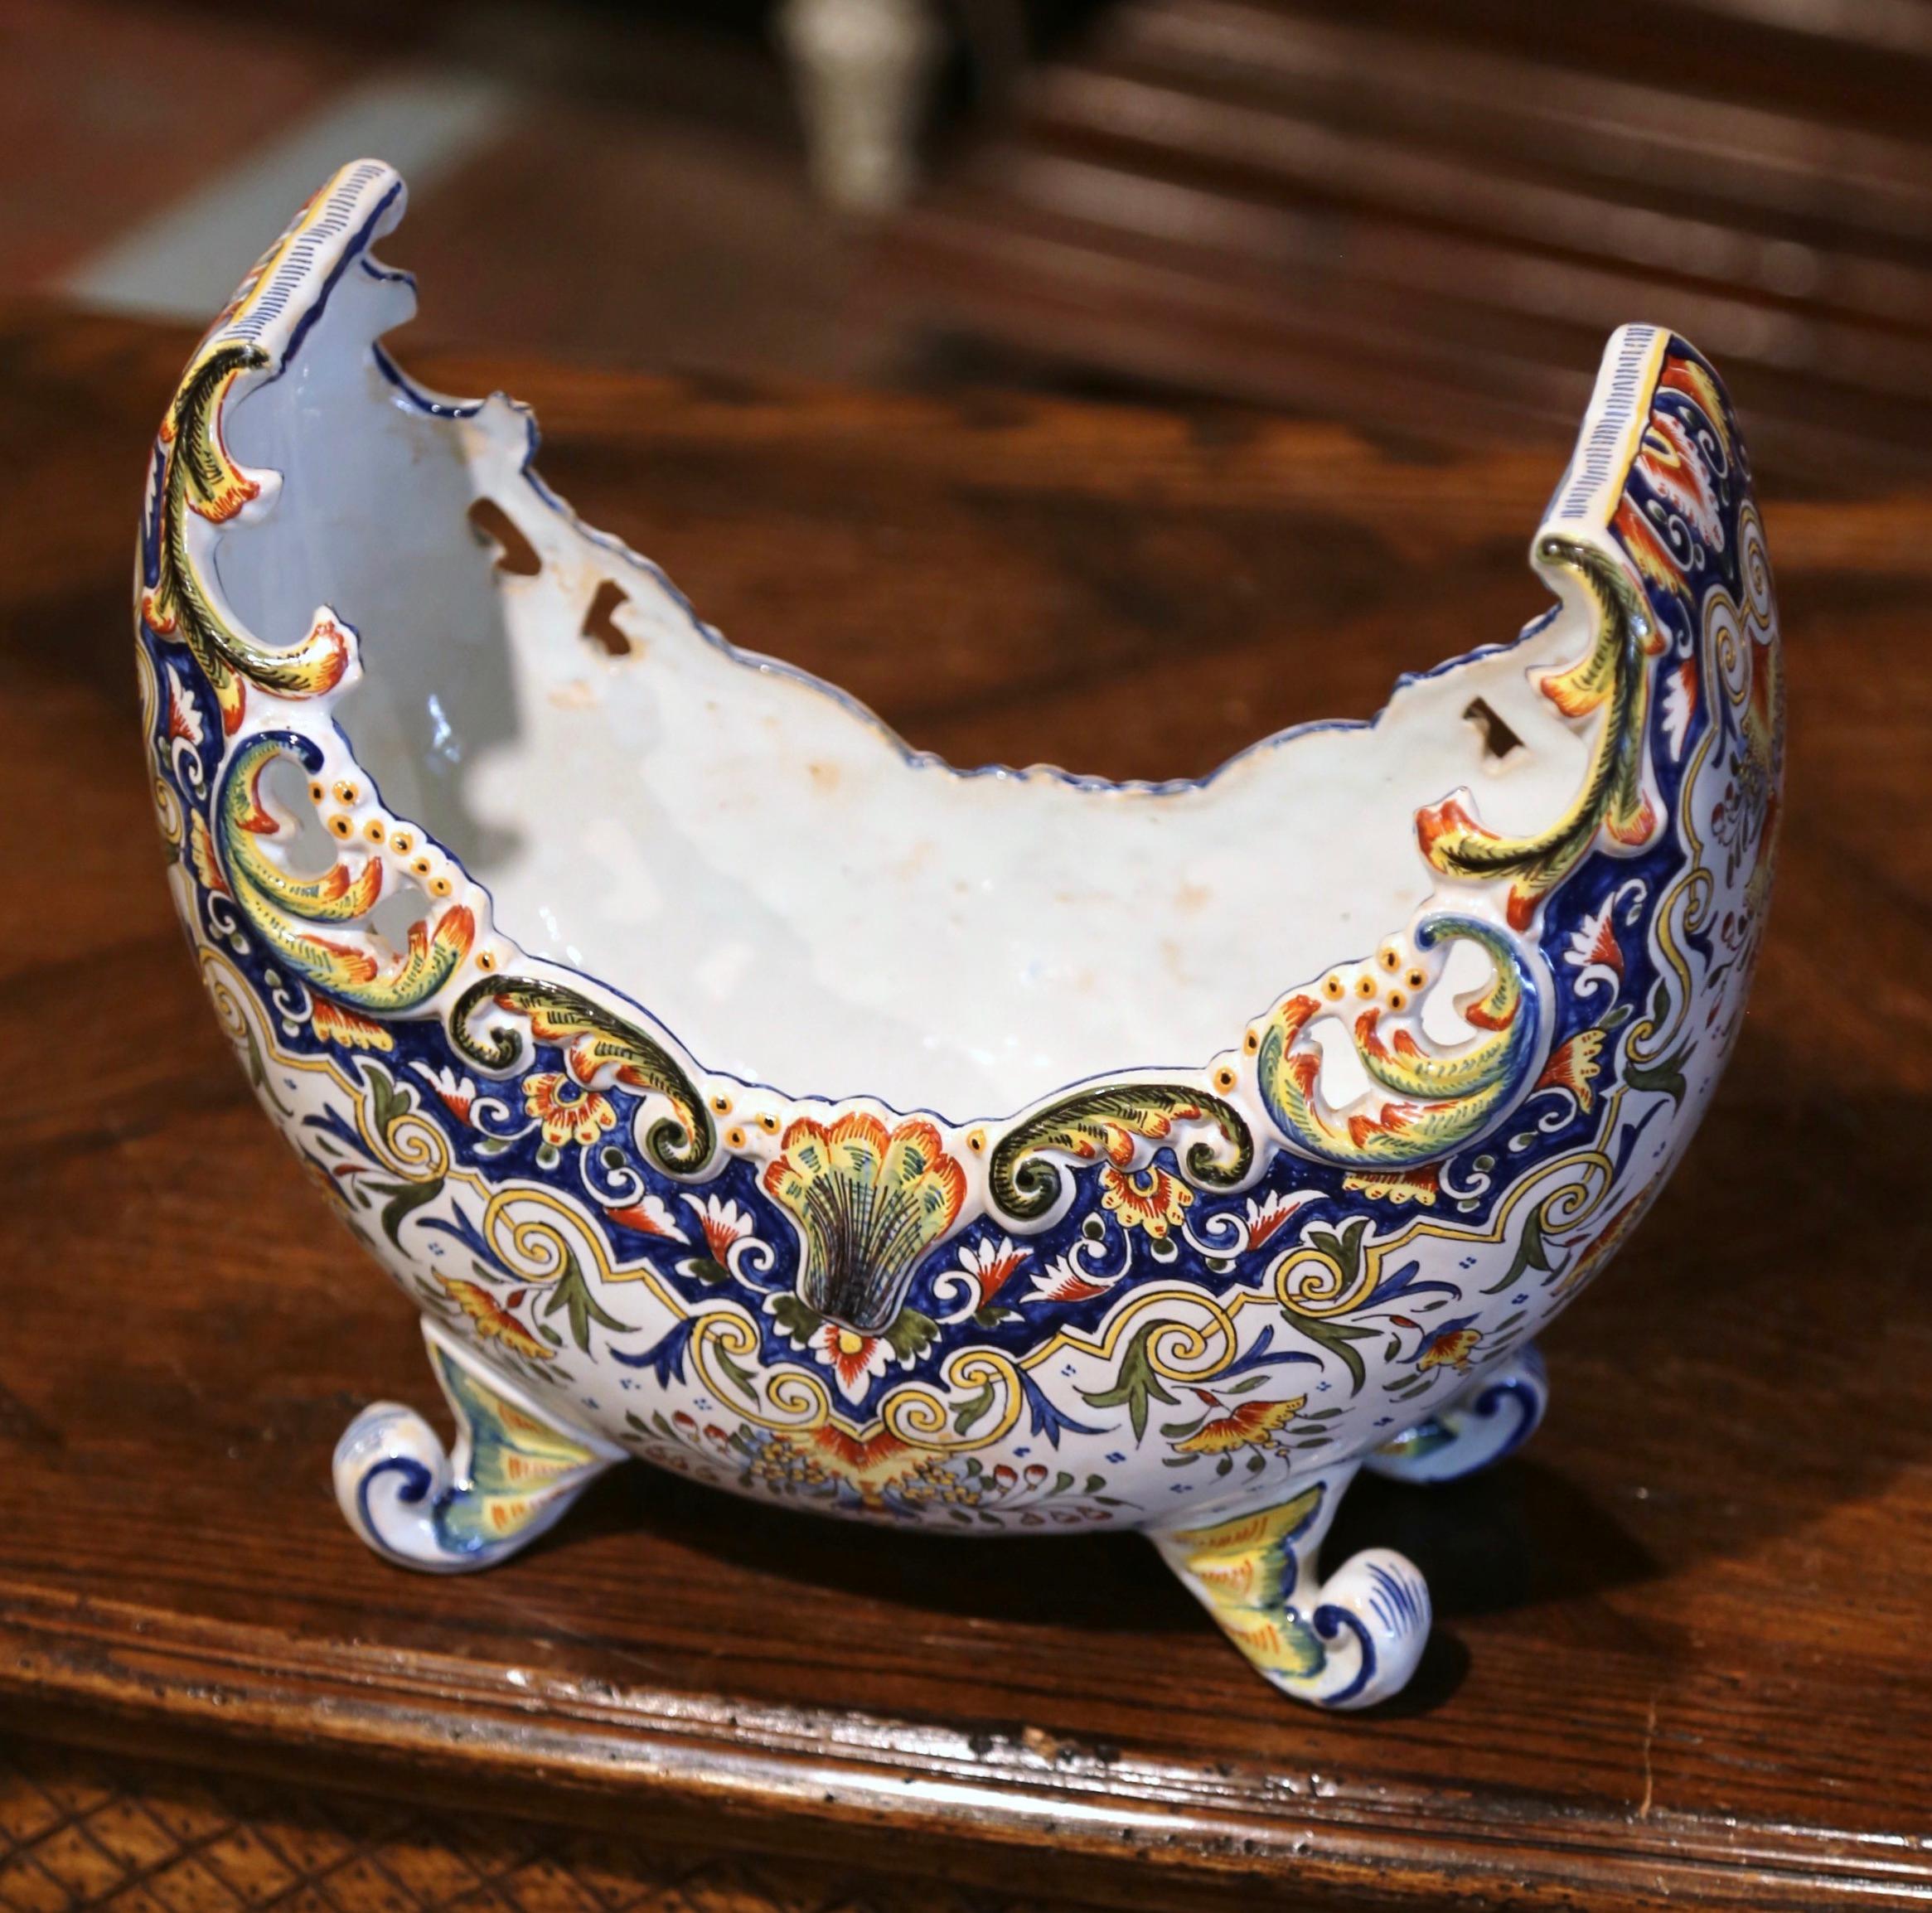 Ceramic 19th Century French Hand Painted Faience Jardinière from Normandy